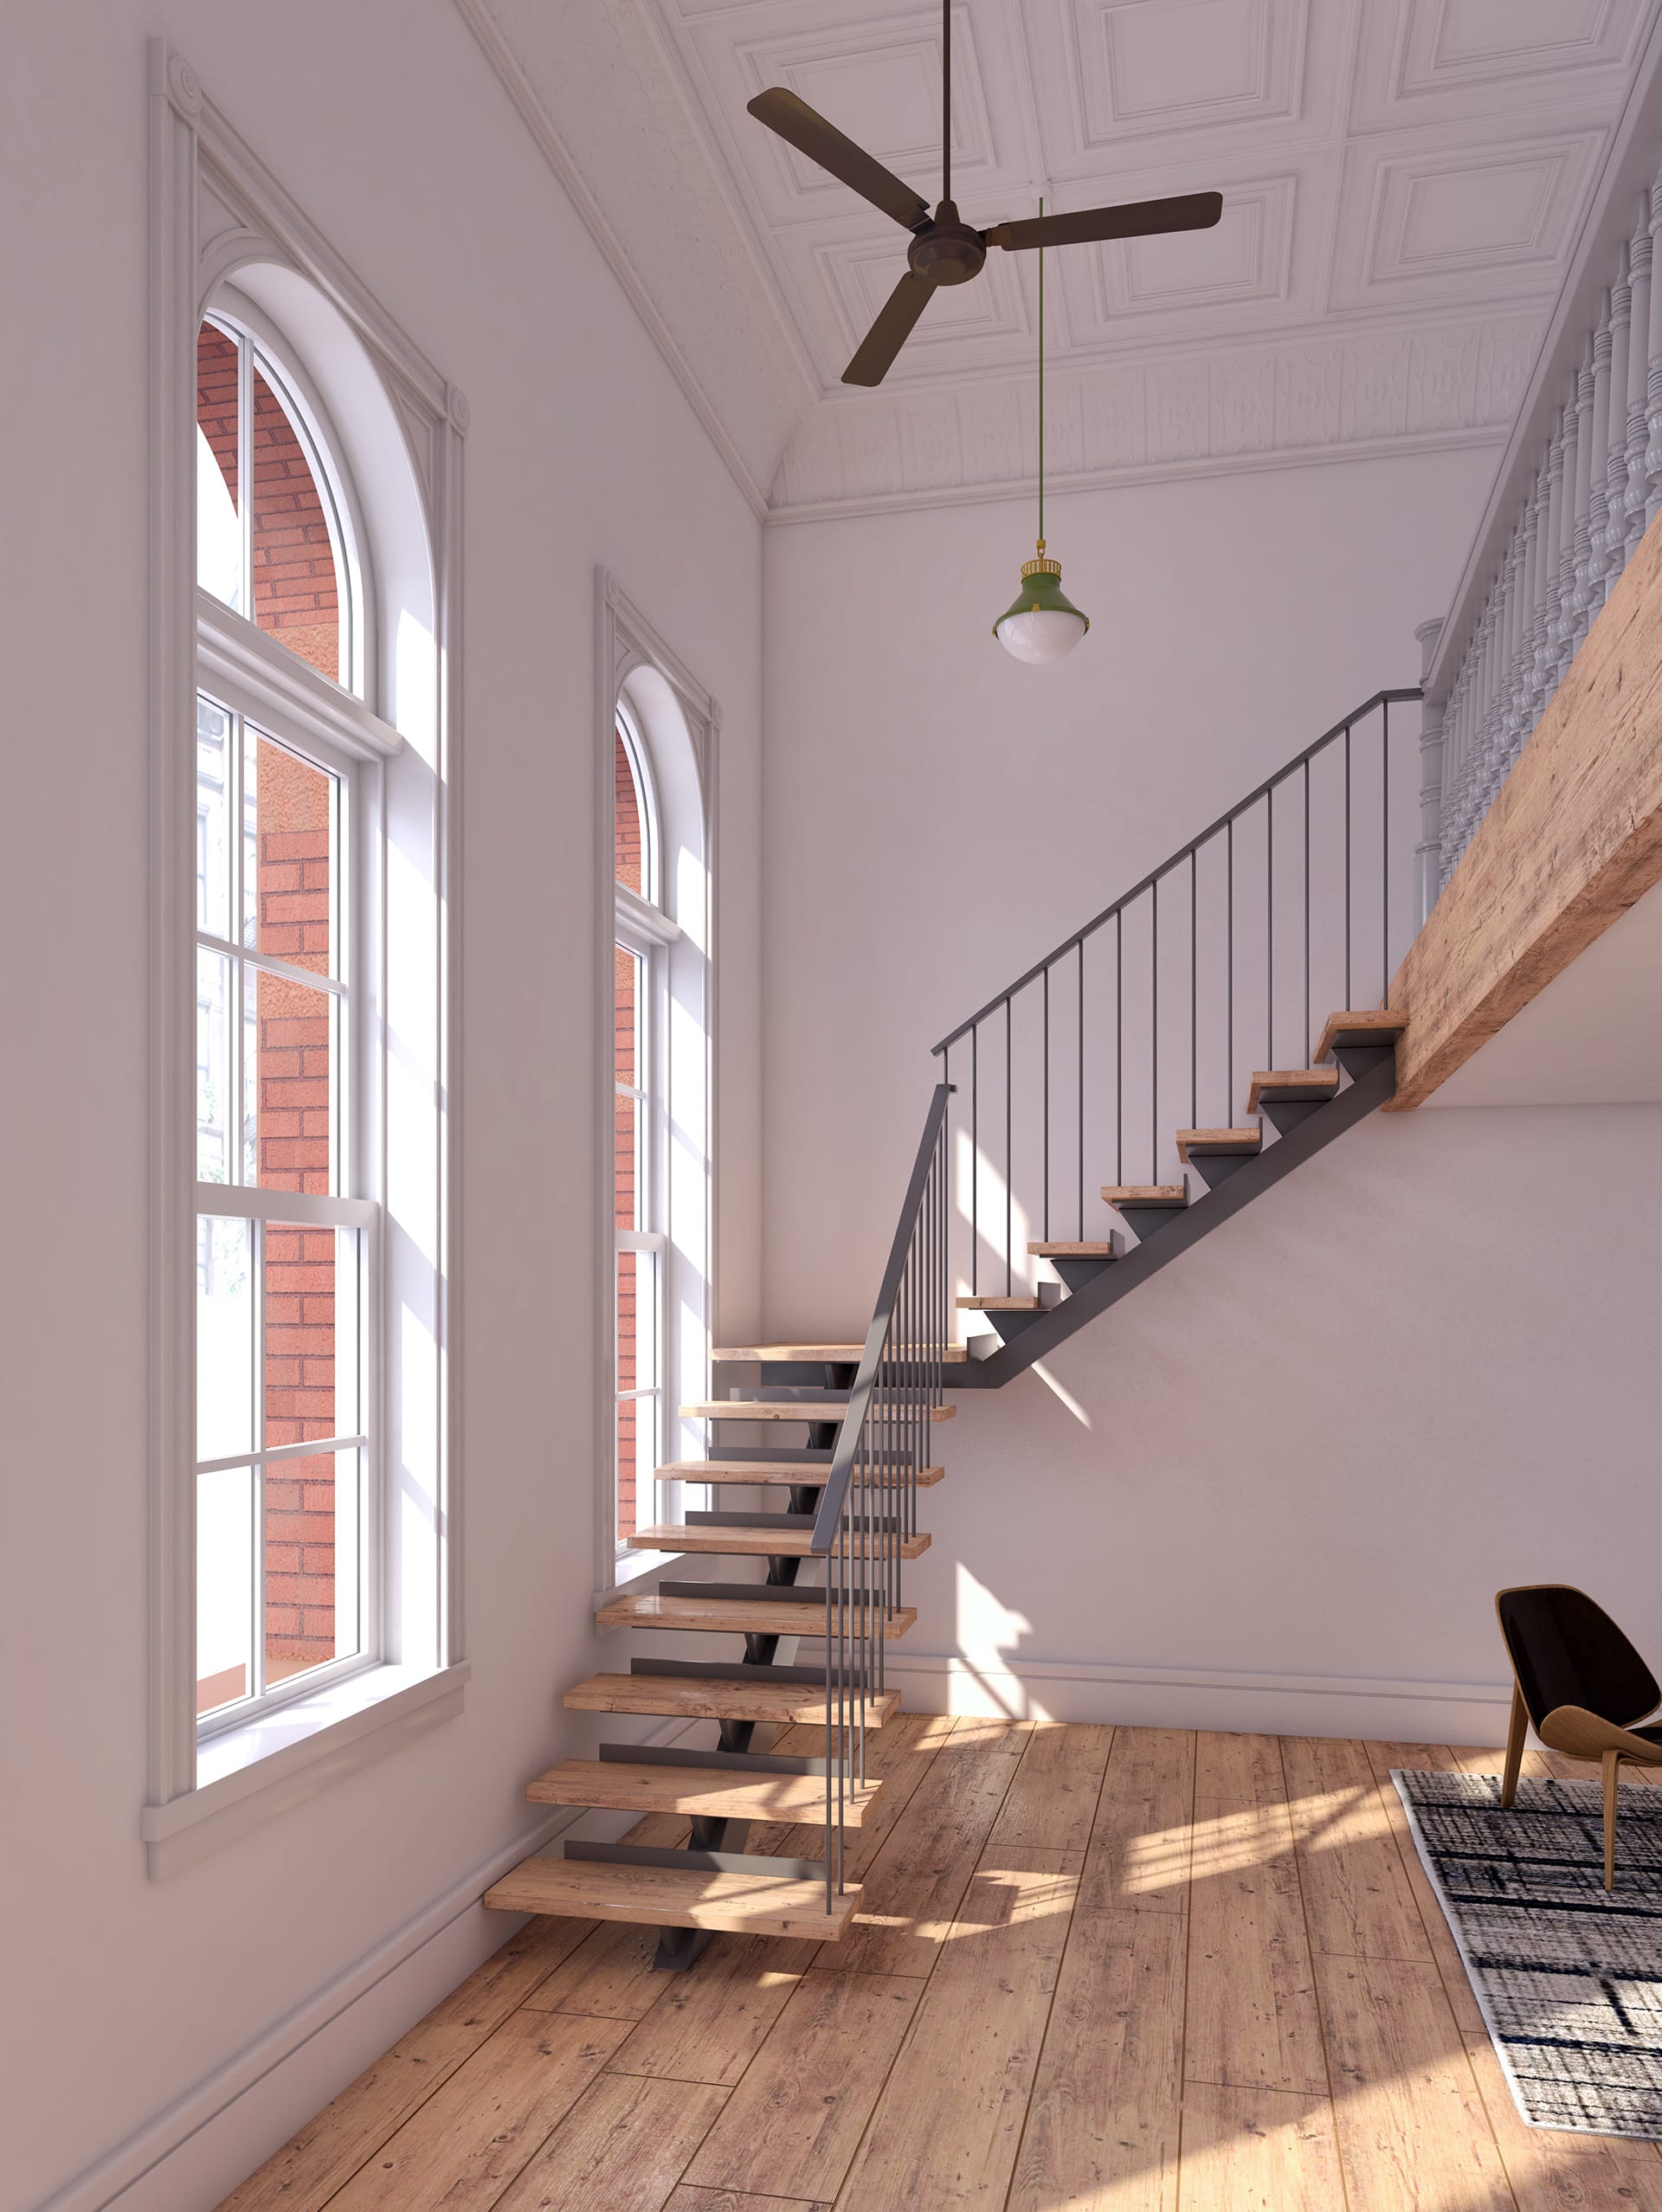 Rendered image of an open, industrial staircase in a double height space with large, arched top windows and wide plank wood floors.